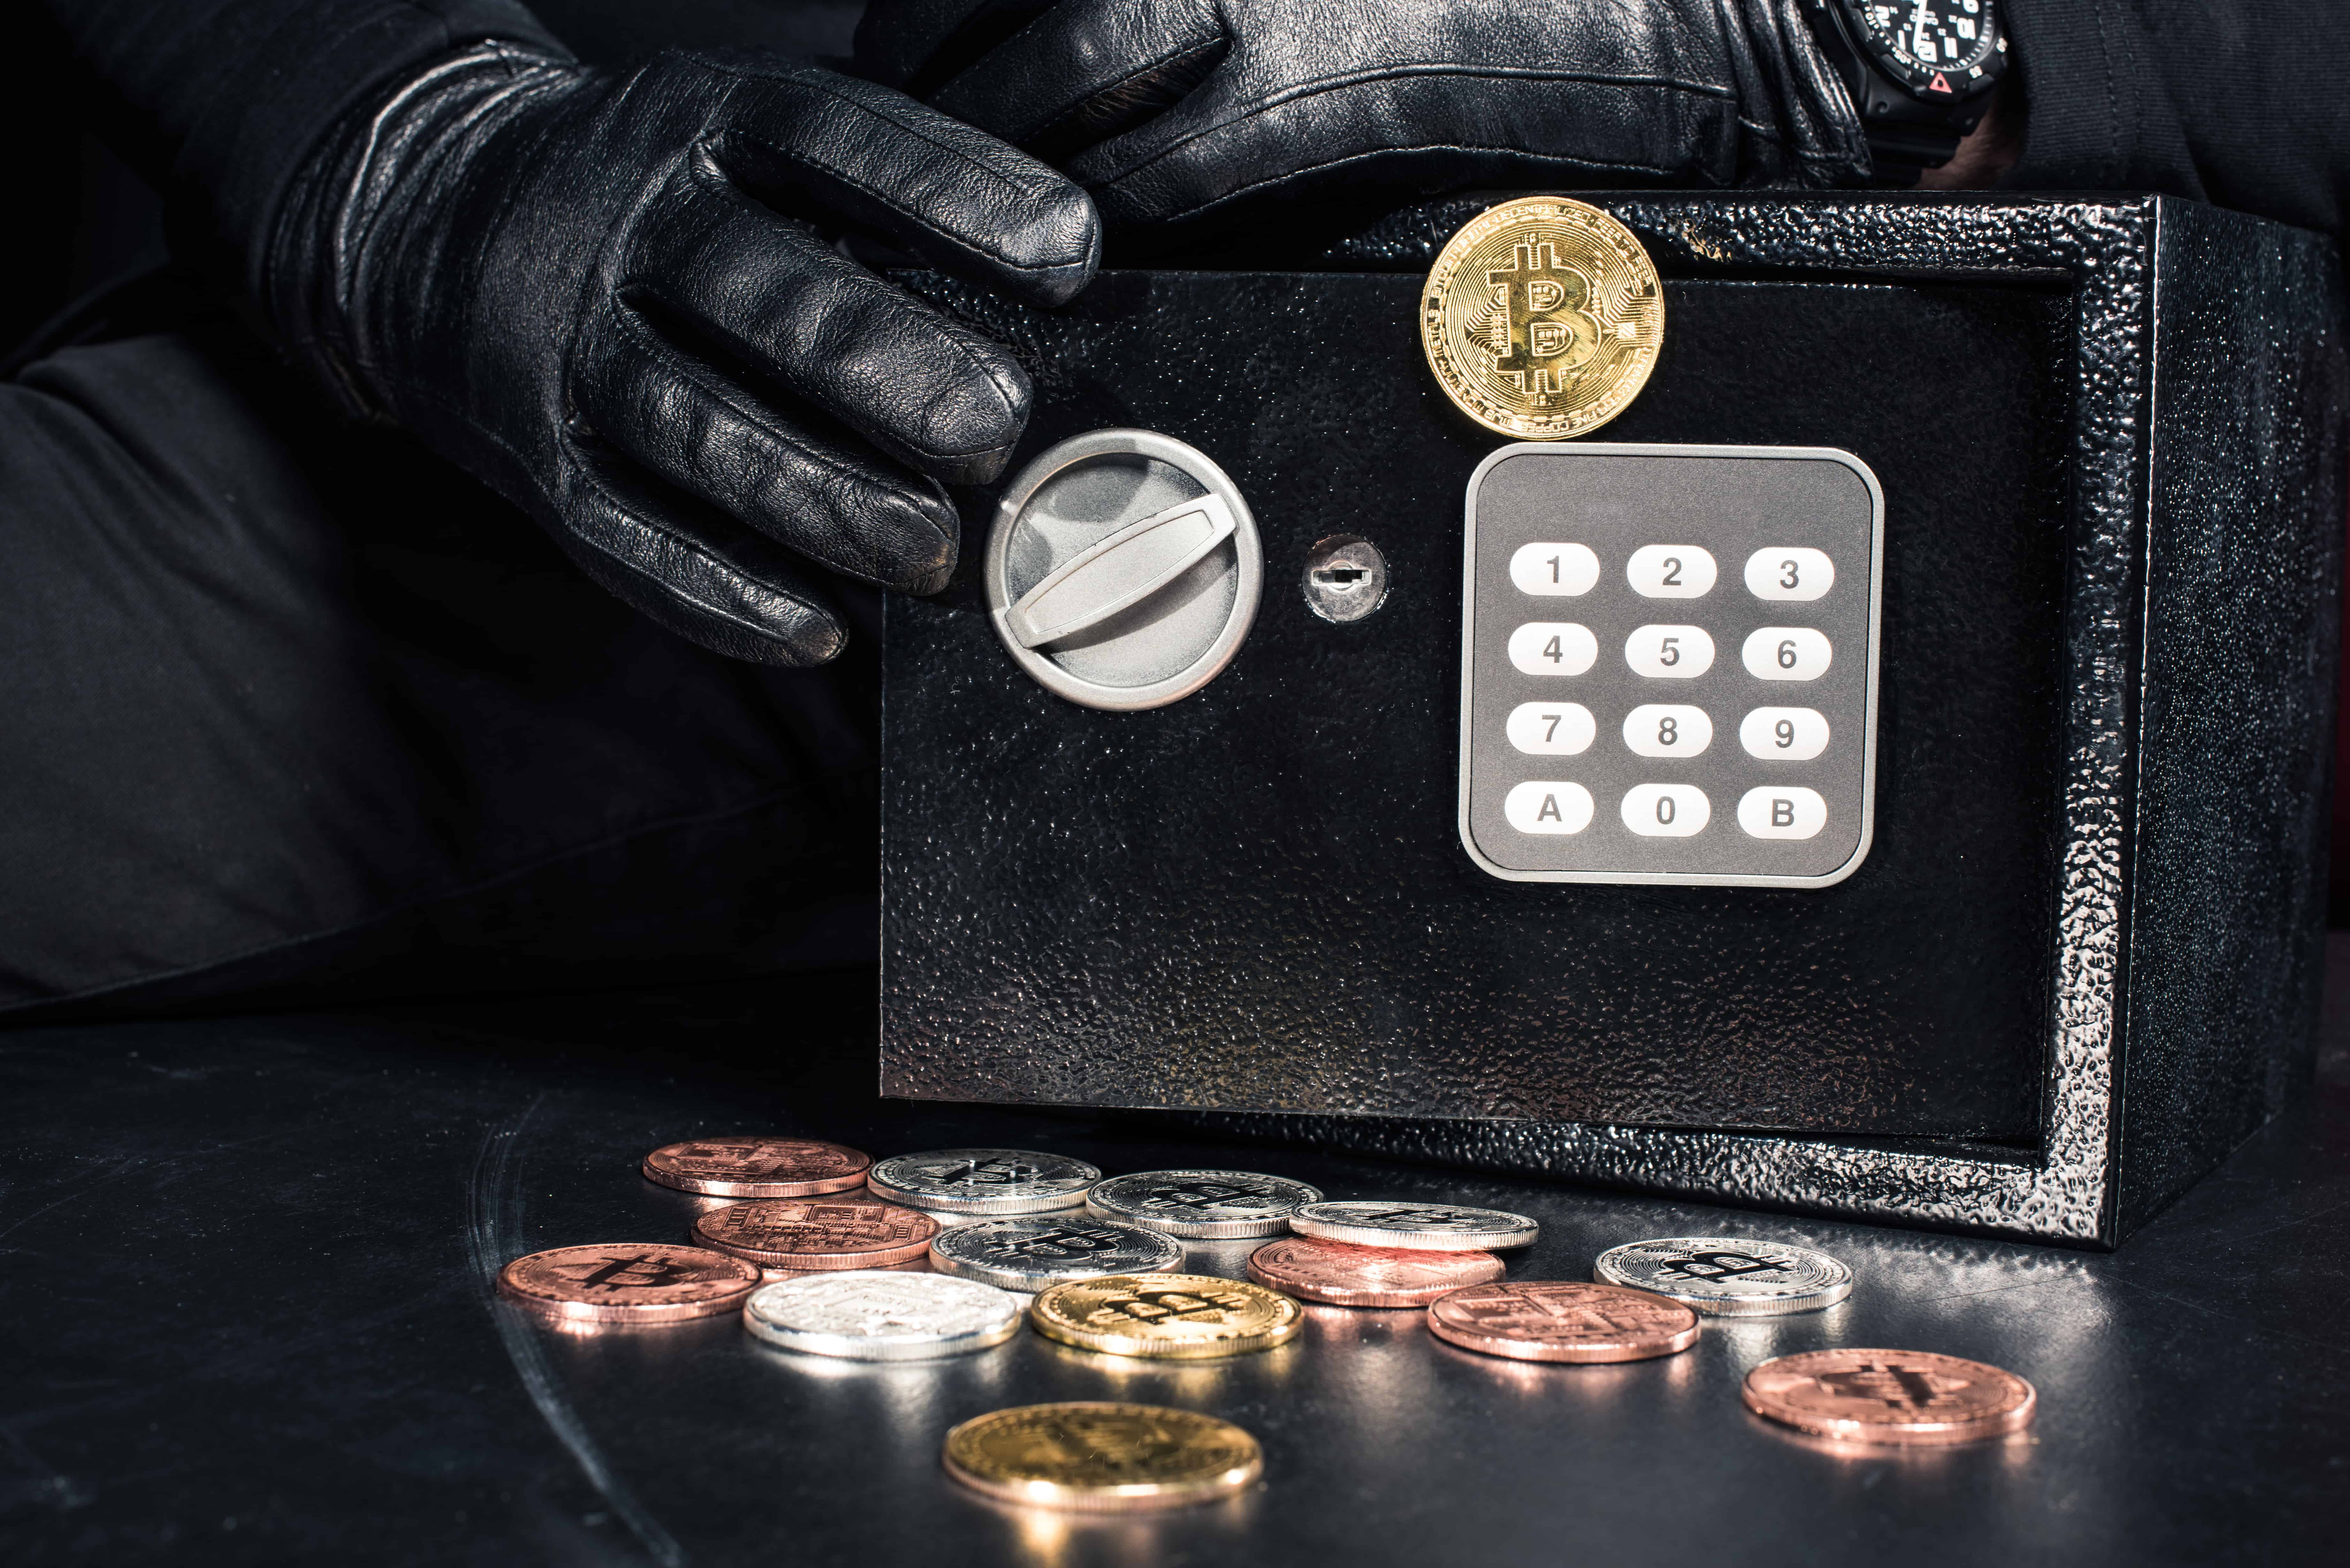 Close-up view of man opening safe with bitcoin cryptocurrency | Turkey sweeps Bitcoin ban under the rug